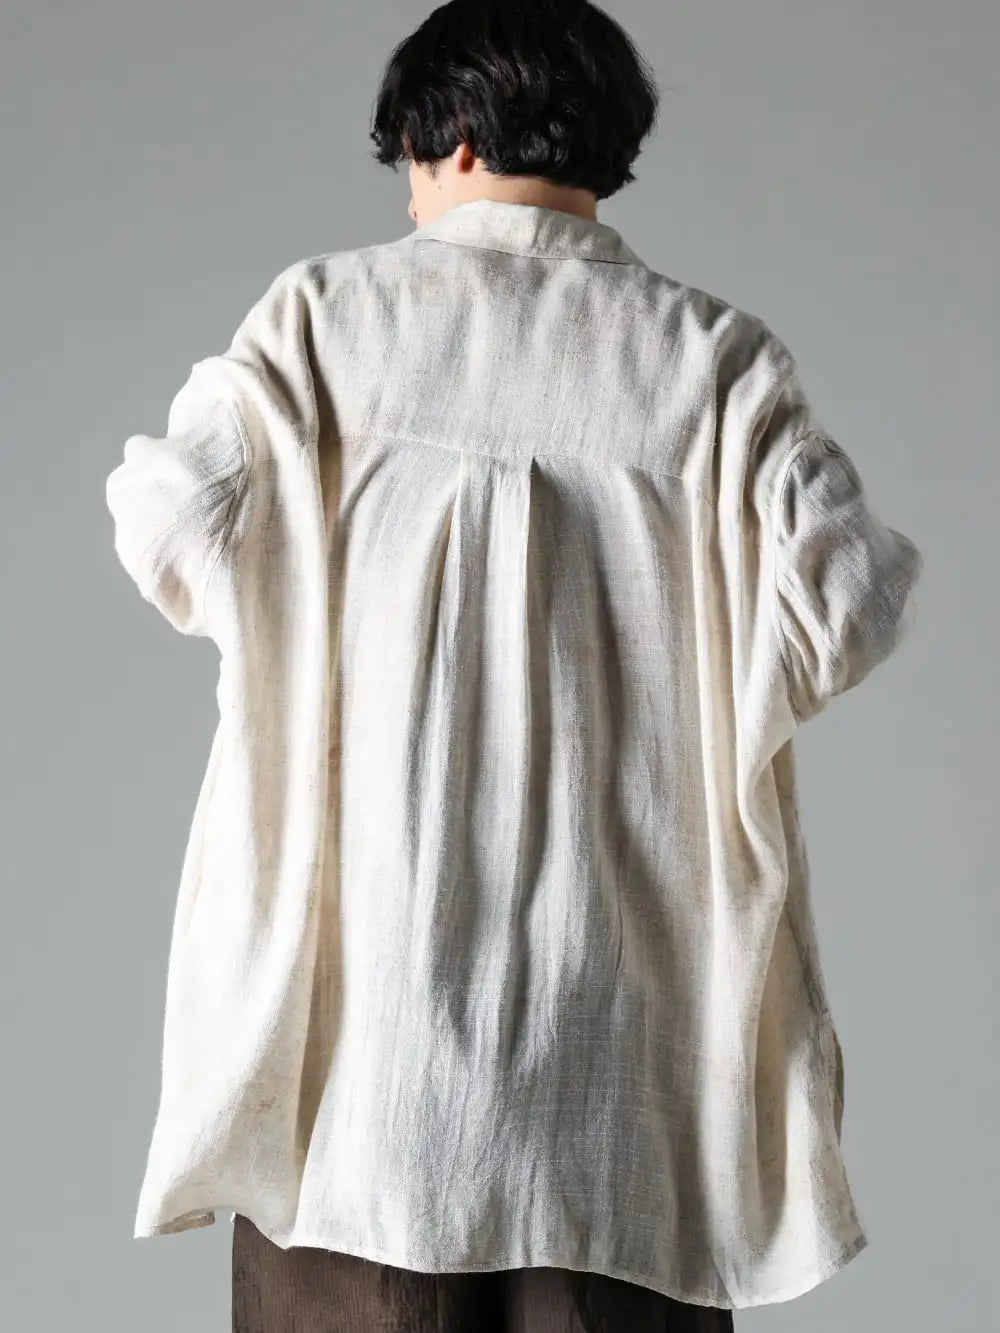 Peng Tai DEVOA 24SS  - Oversized shirts tailored with a neutral atmosphere - PTS24M06-2 Hand Dye Double Pocket Oversized Shirt SHE-CTKM Shirt Cotton 2-006